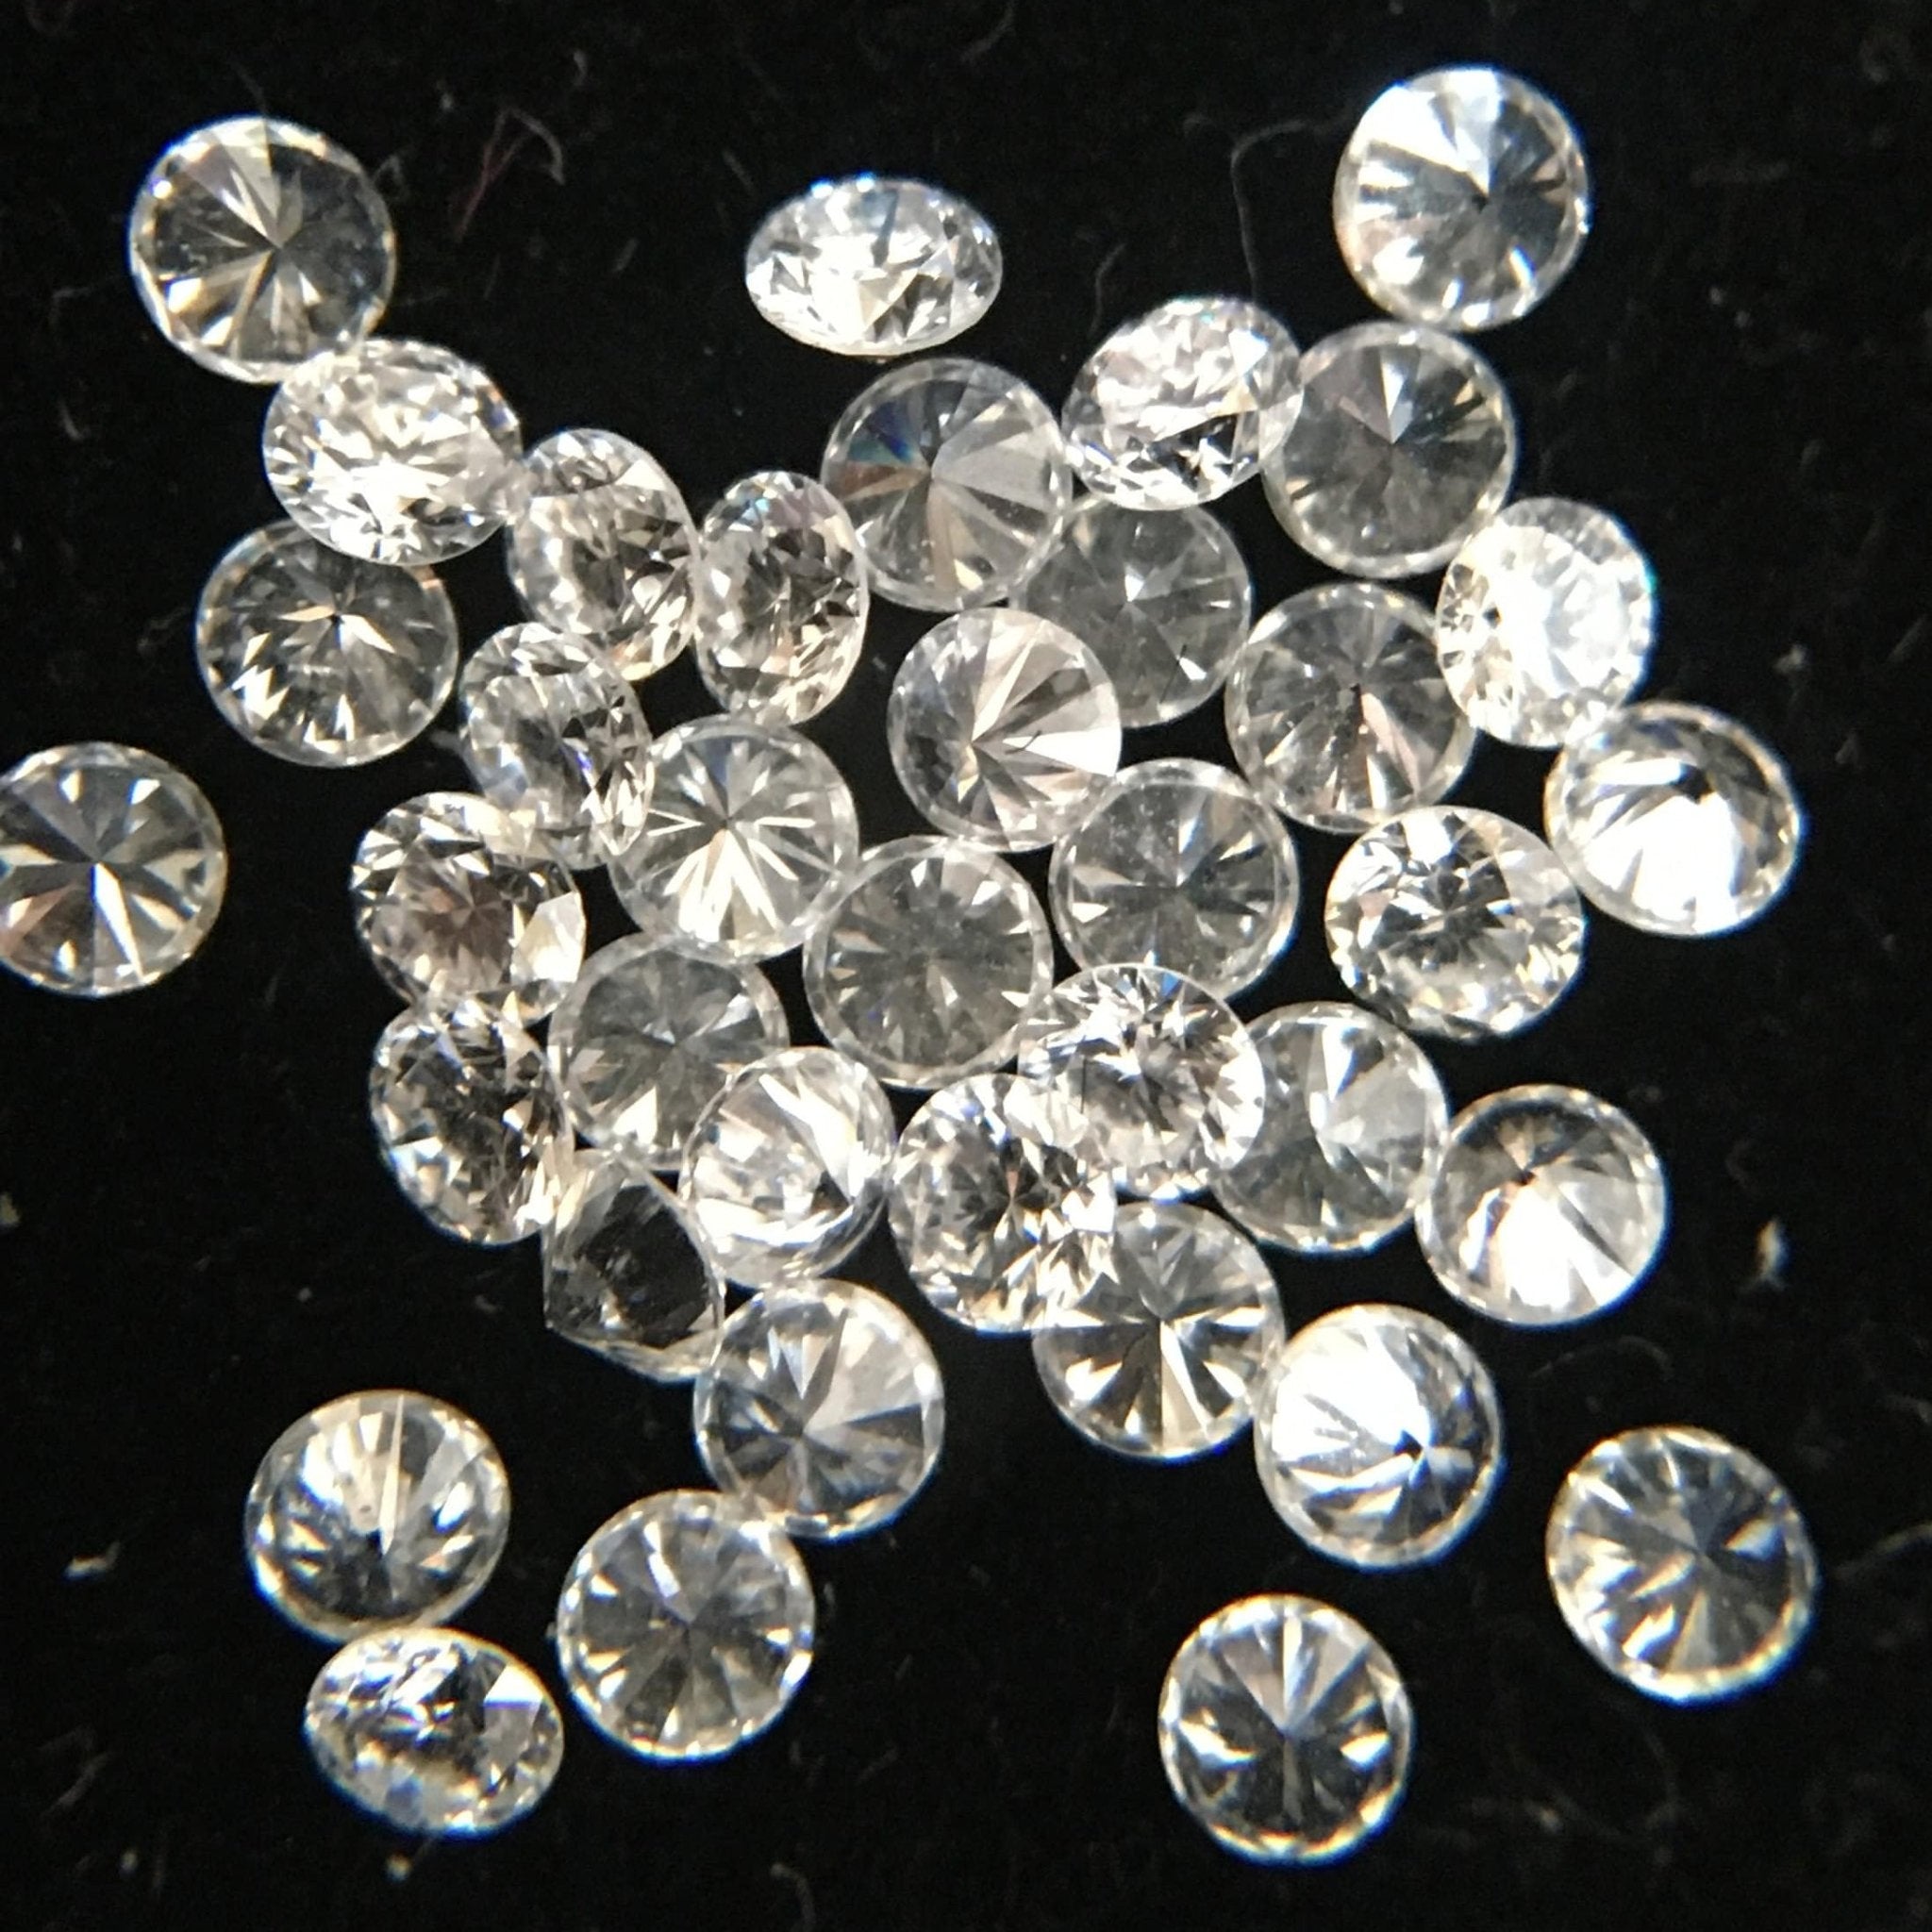 0.80 - 2.00 MM CVD Loose Diamond of VVS - VS Purity with E F Color - STAR JEWELRY